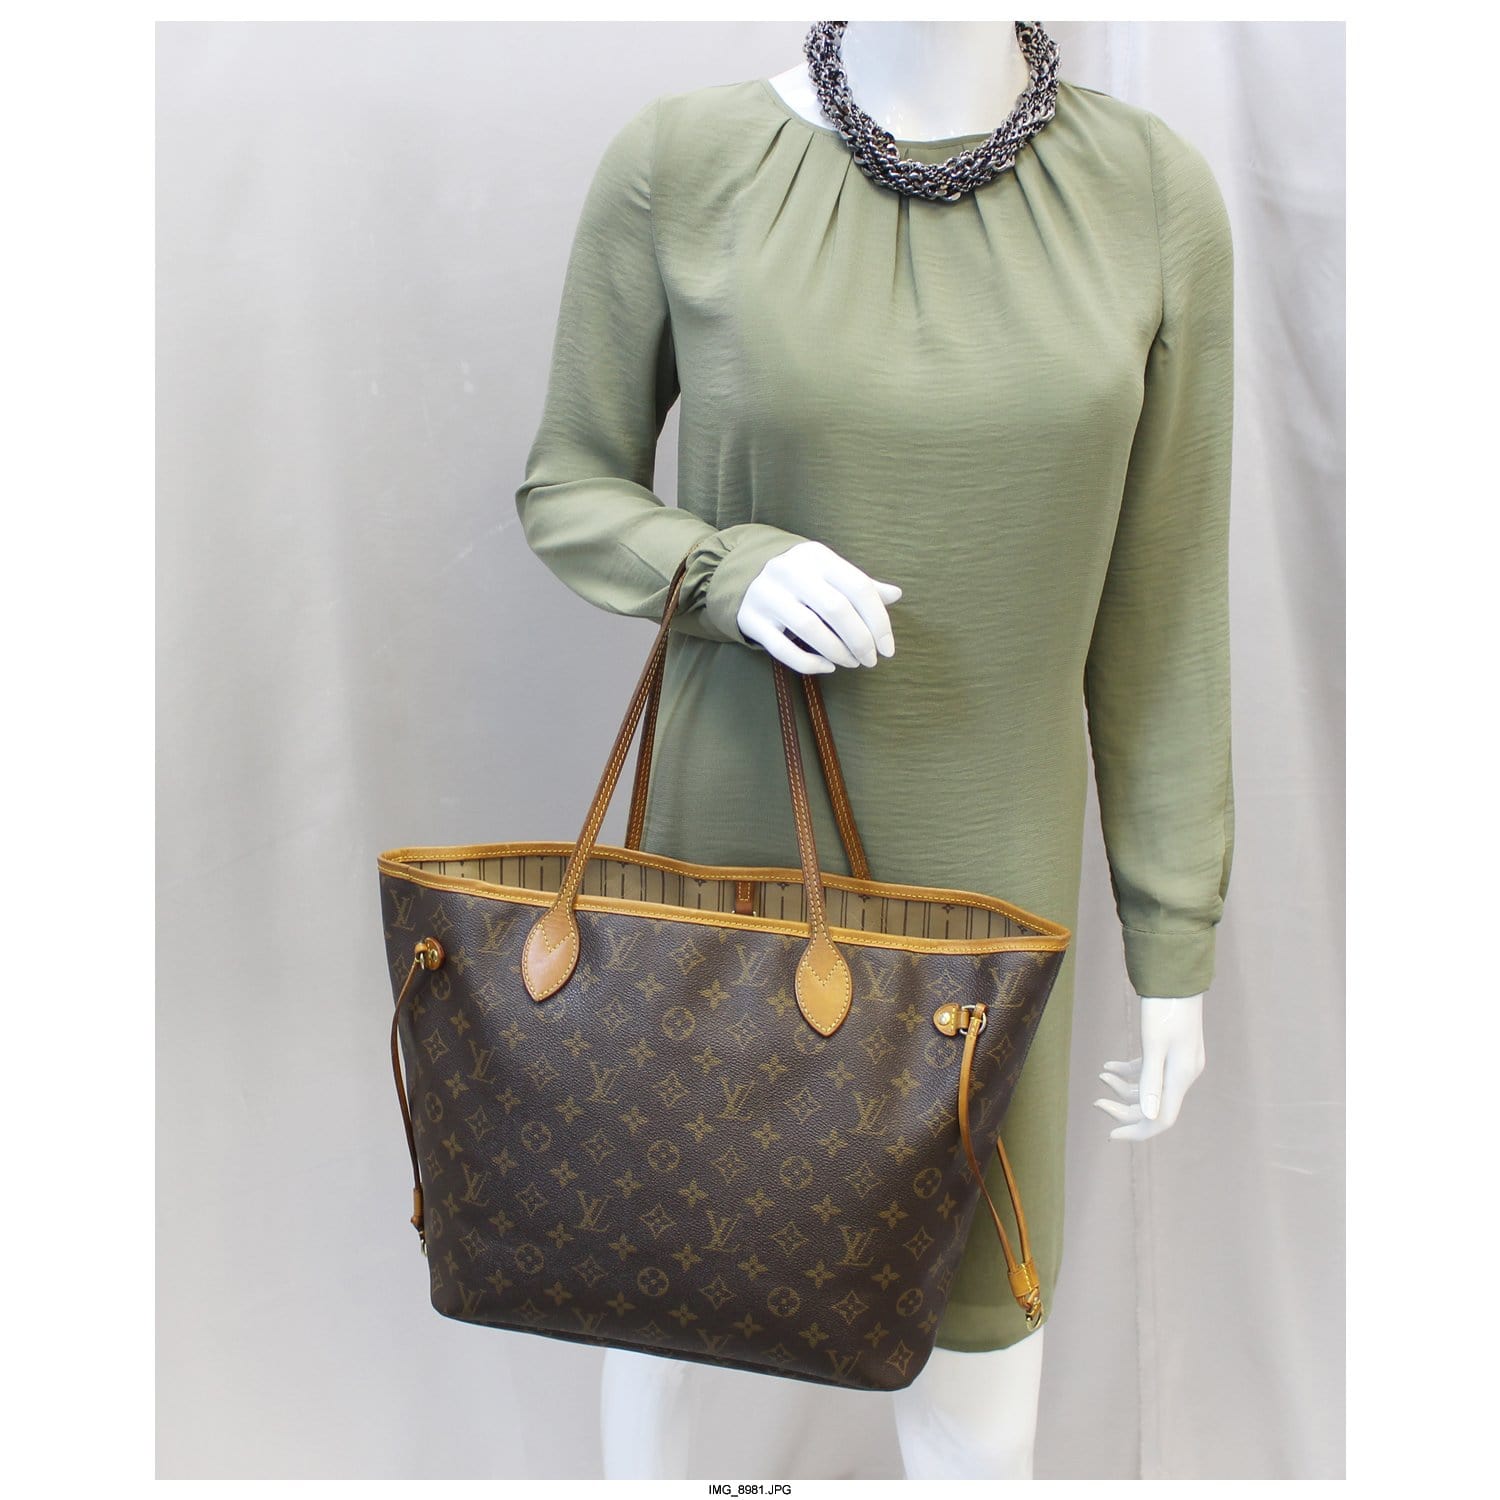 neverfull mm tote bag louis vuittons